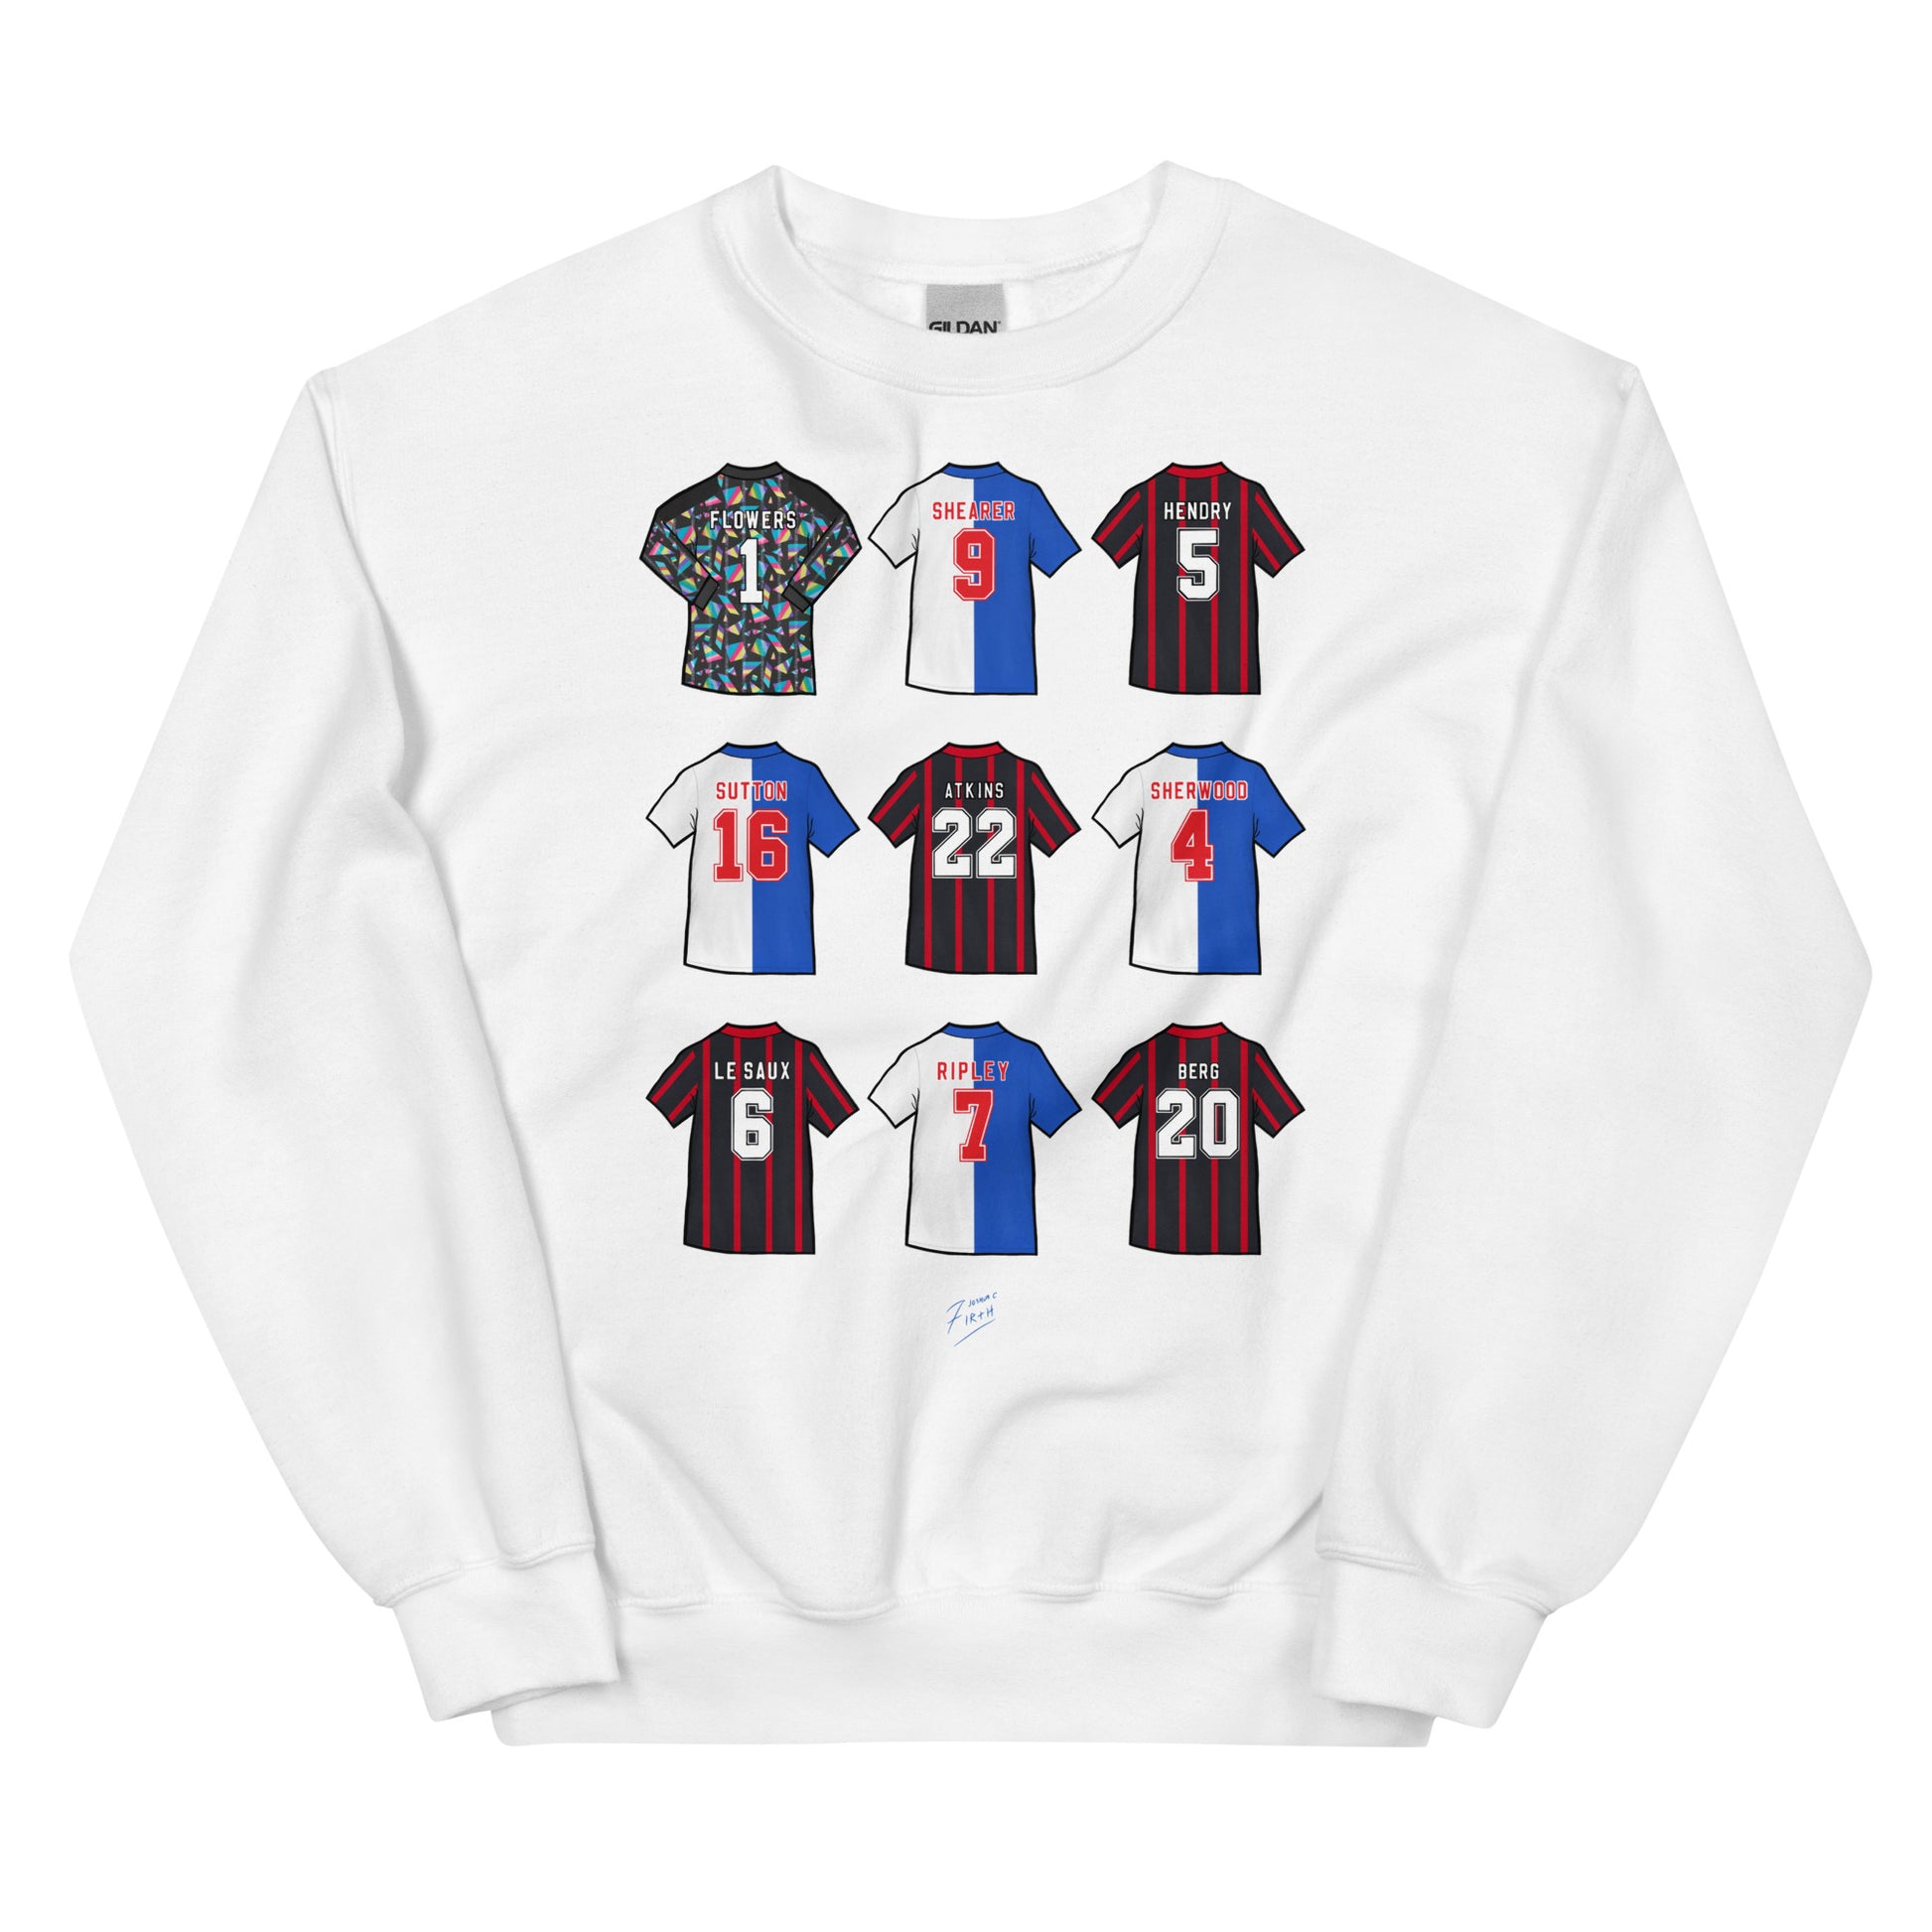 White sweatshirt jumper inspired by the Blackburn Rovers side of 1994/95